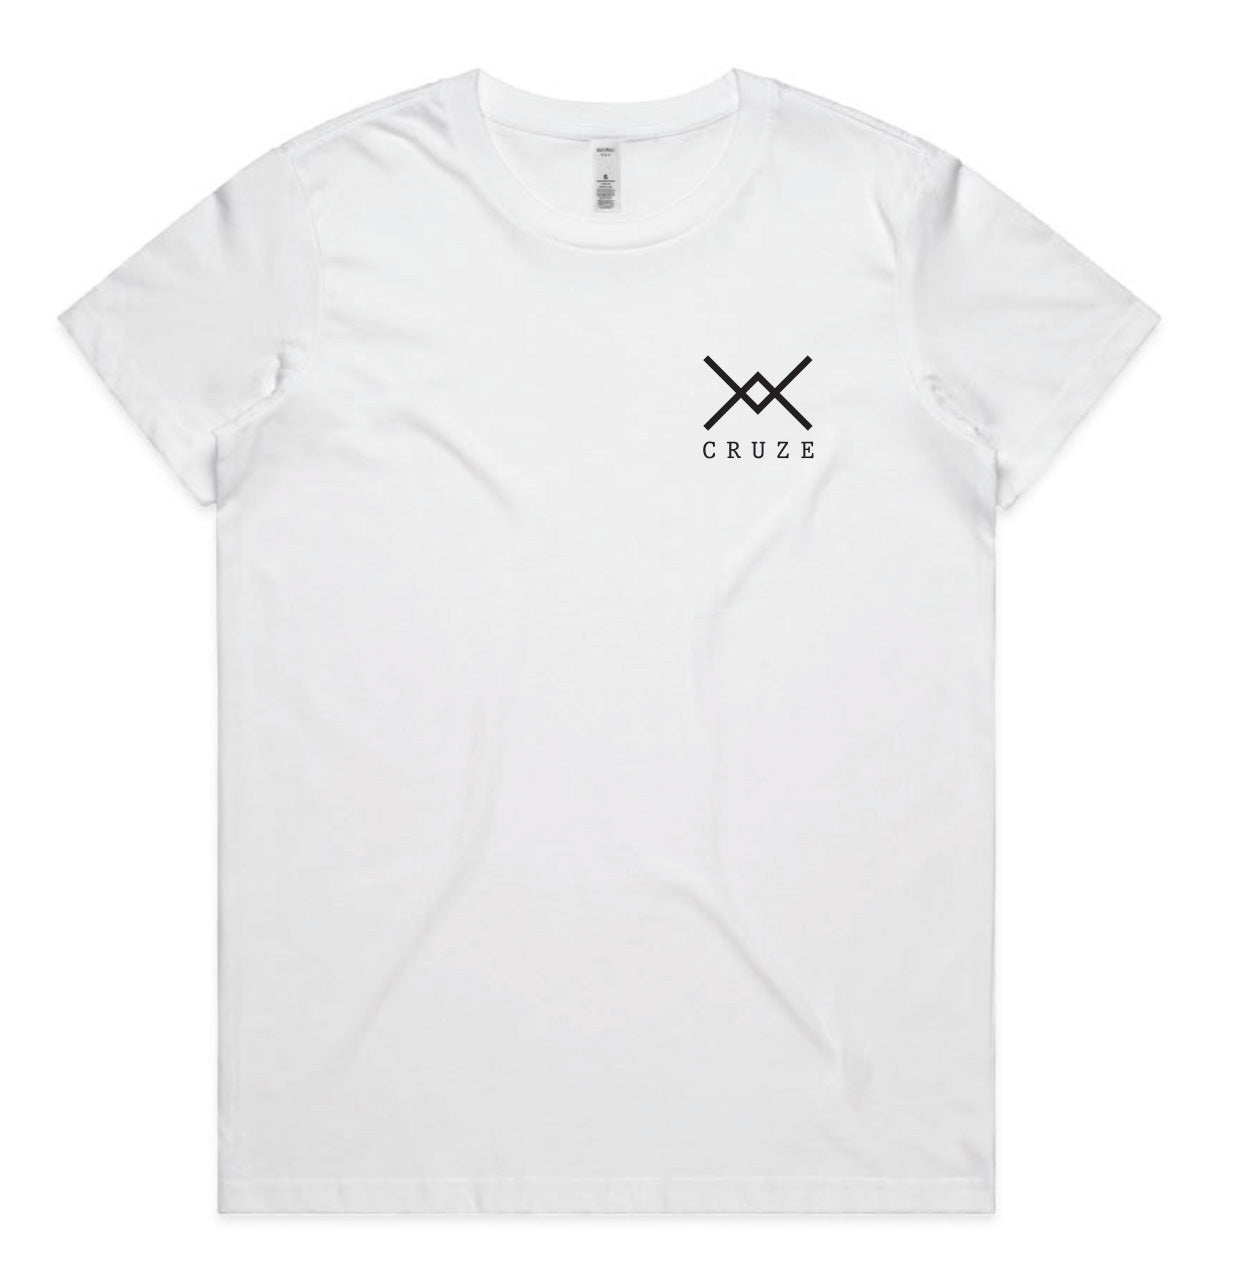 Front Kids / Youth Tee Shirt white